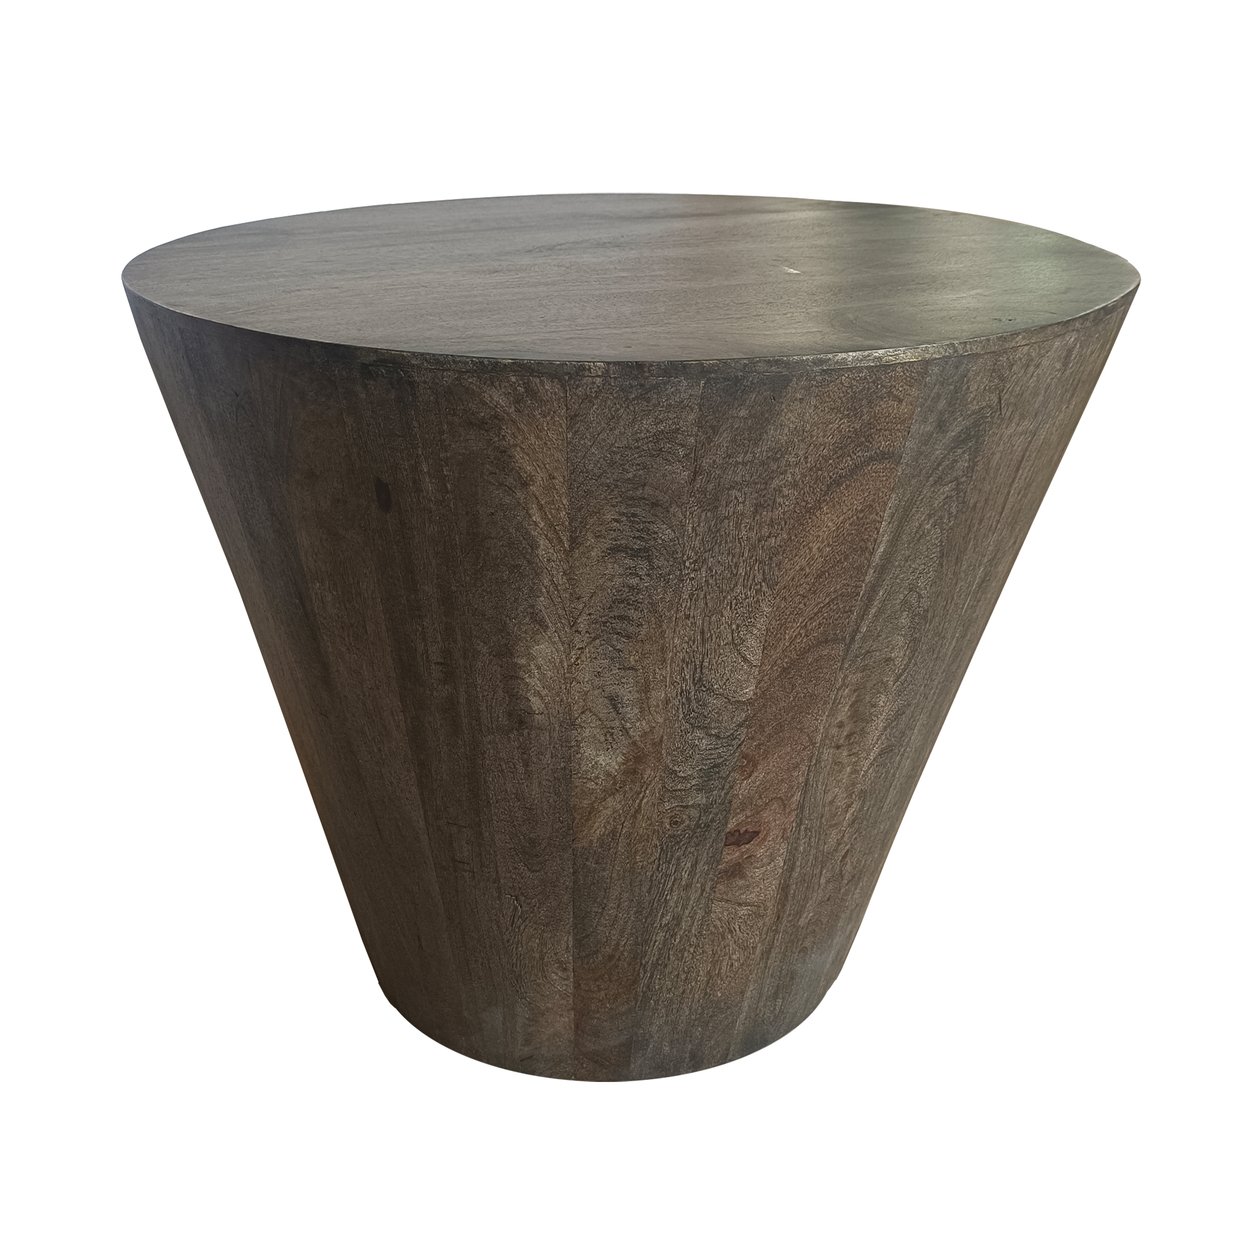 24 Inch Side End Table, Round Drum Shape, Handcrafted Distressed Gray Mango Wood - Saltoro Sherpi